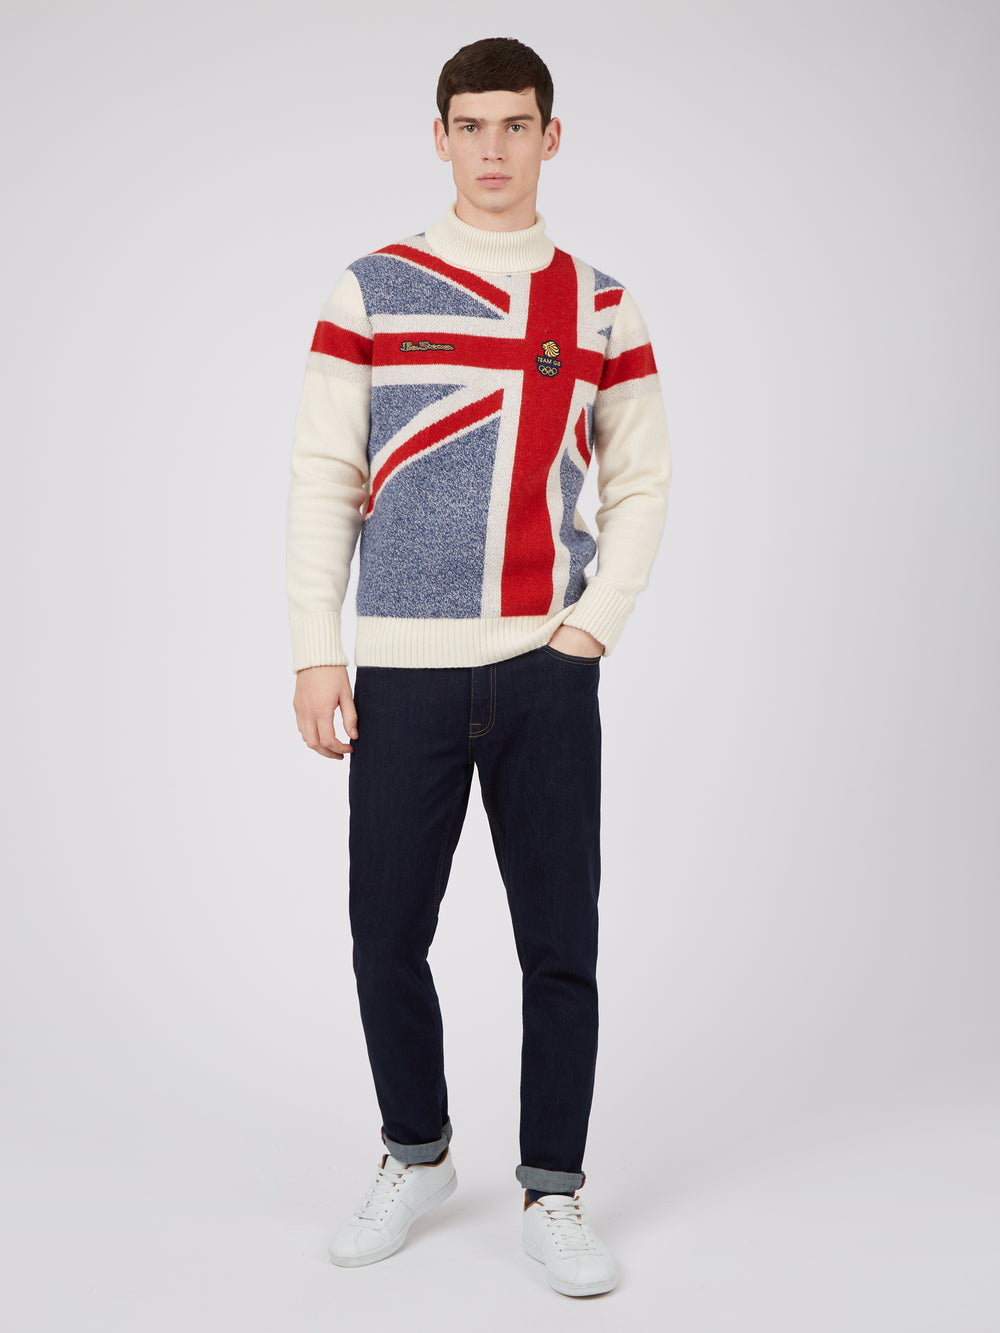 Team GB, Ben Sherman sweater, knitwear, Official 2022 Winter Olympics, Limited Edition Great Britain sweater, Beijing, GB flag, cream, roll neck full